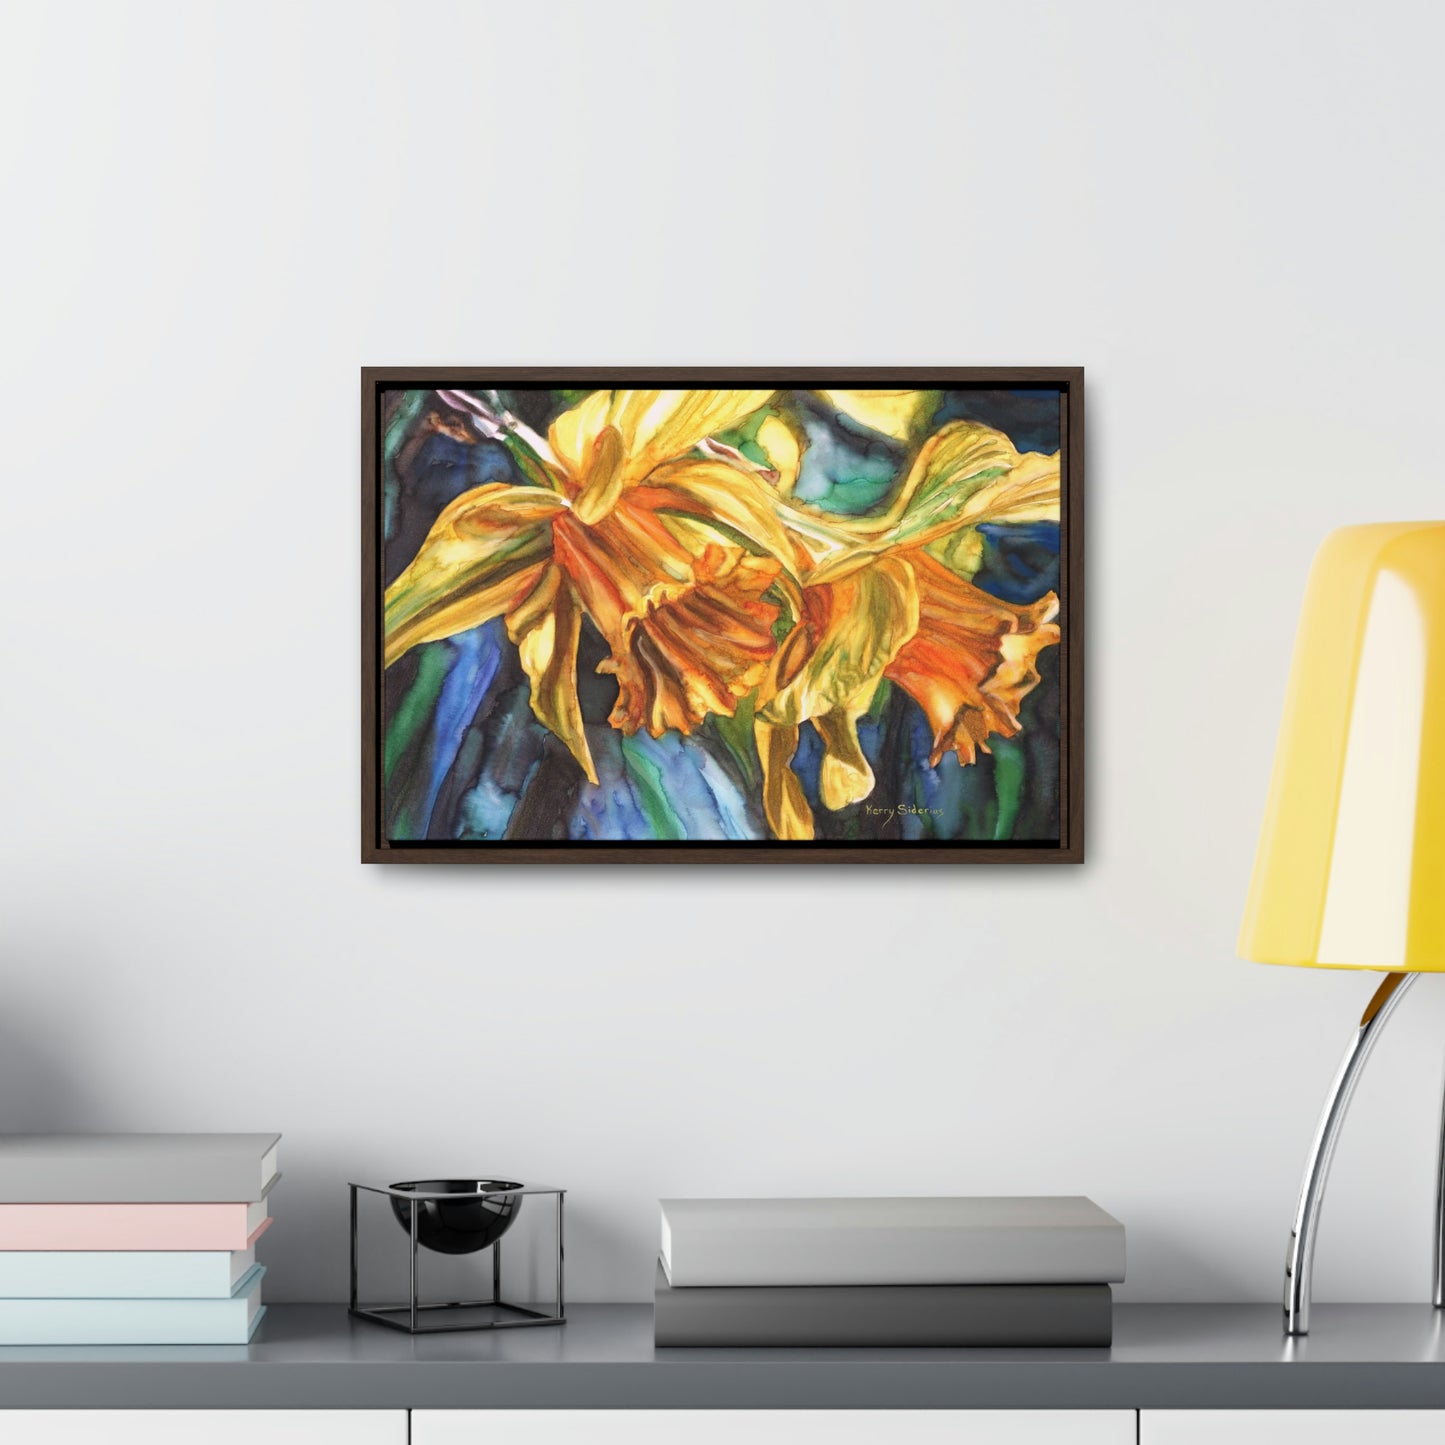 "Daffodils in March" Gallery-Wrapped Walnut Wood Framed Canvas - Kerry Siderius Art 